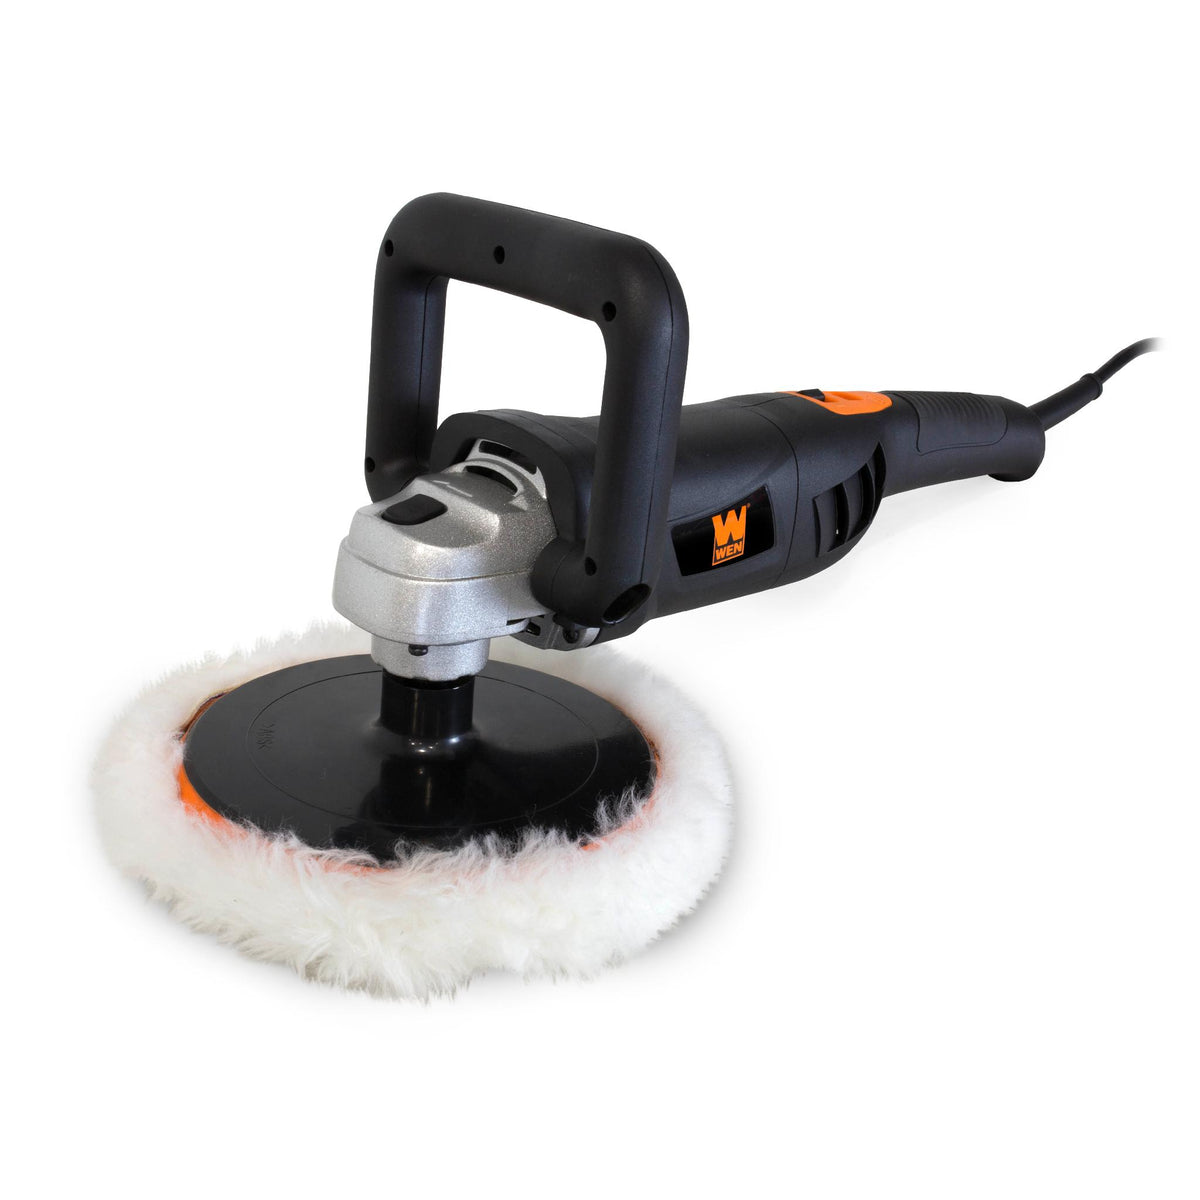 WEN 948 10 Amp Variable Speed Polisher with Digital Readout 7